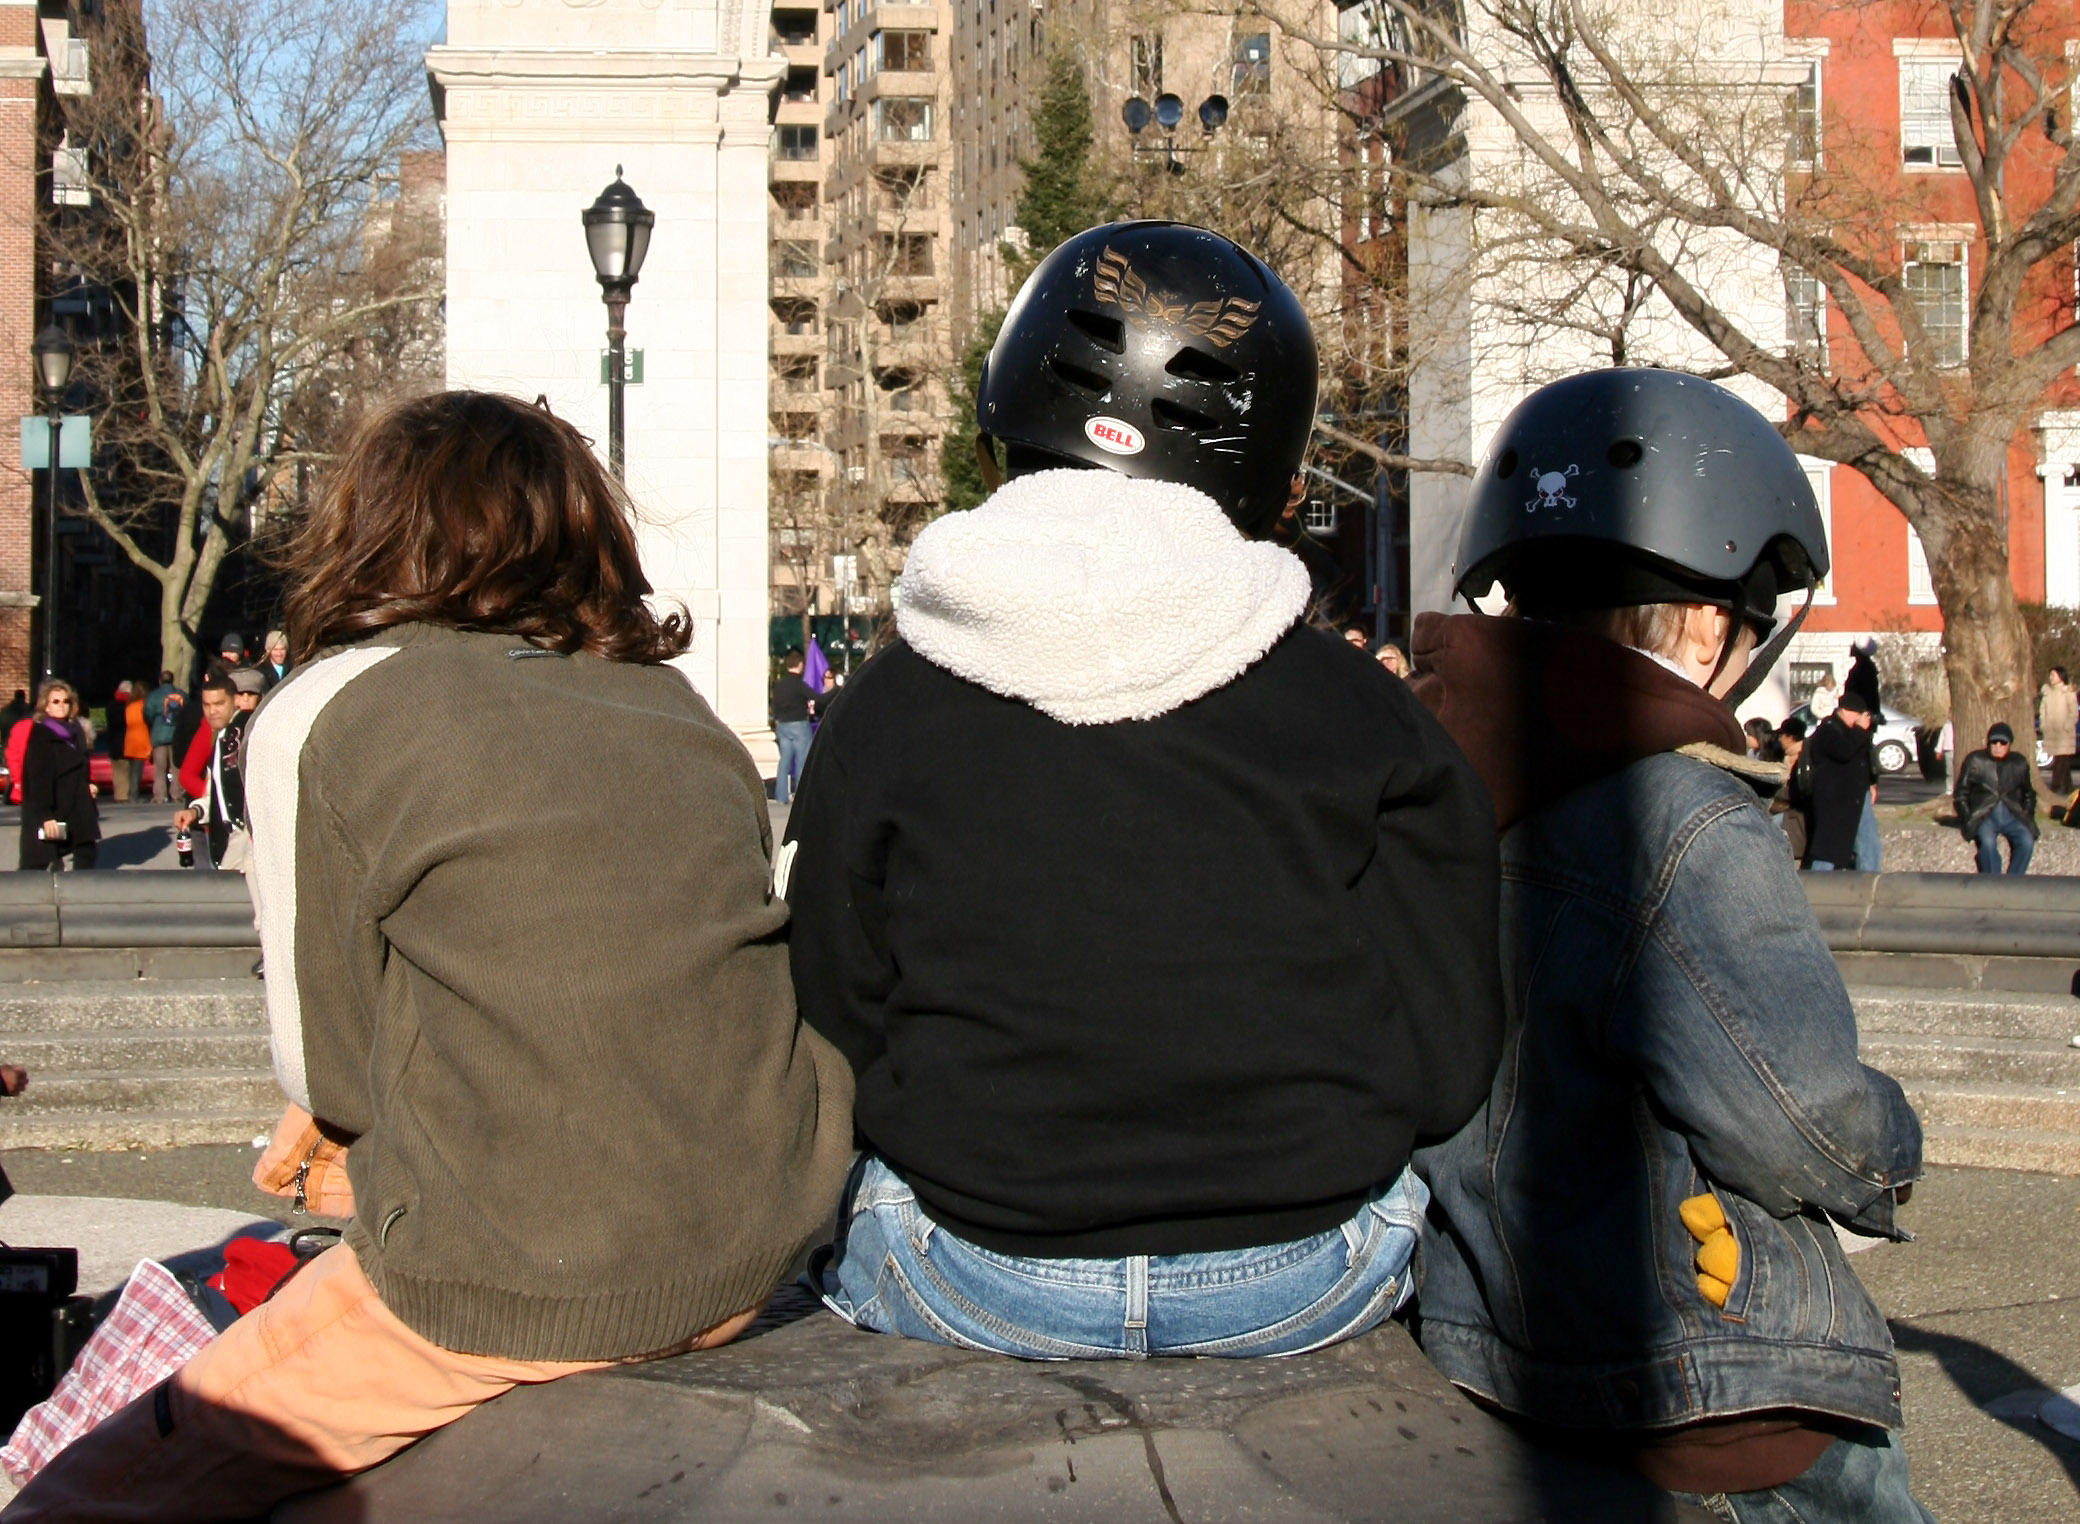 Three Buddies Watching a Performance at the Fountain